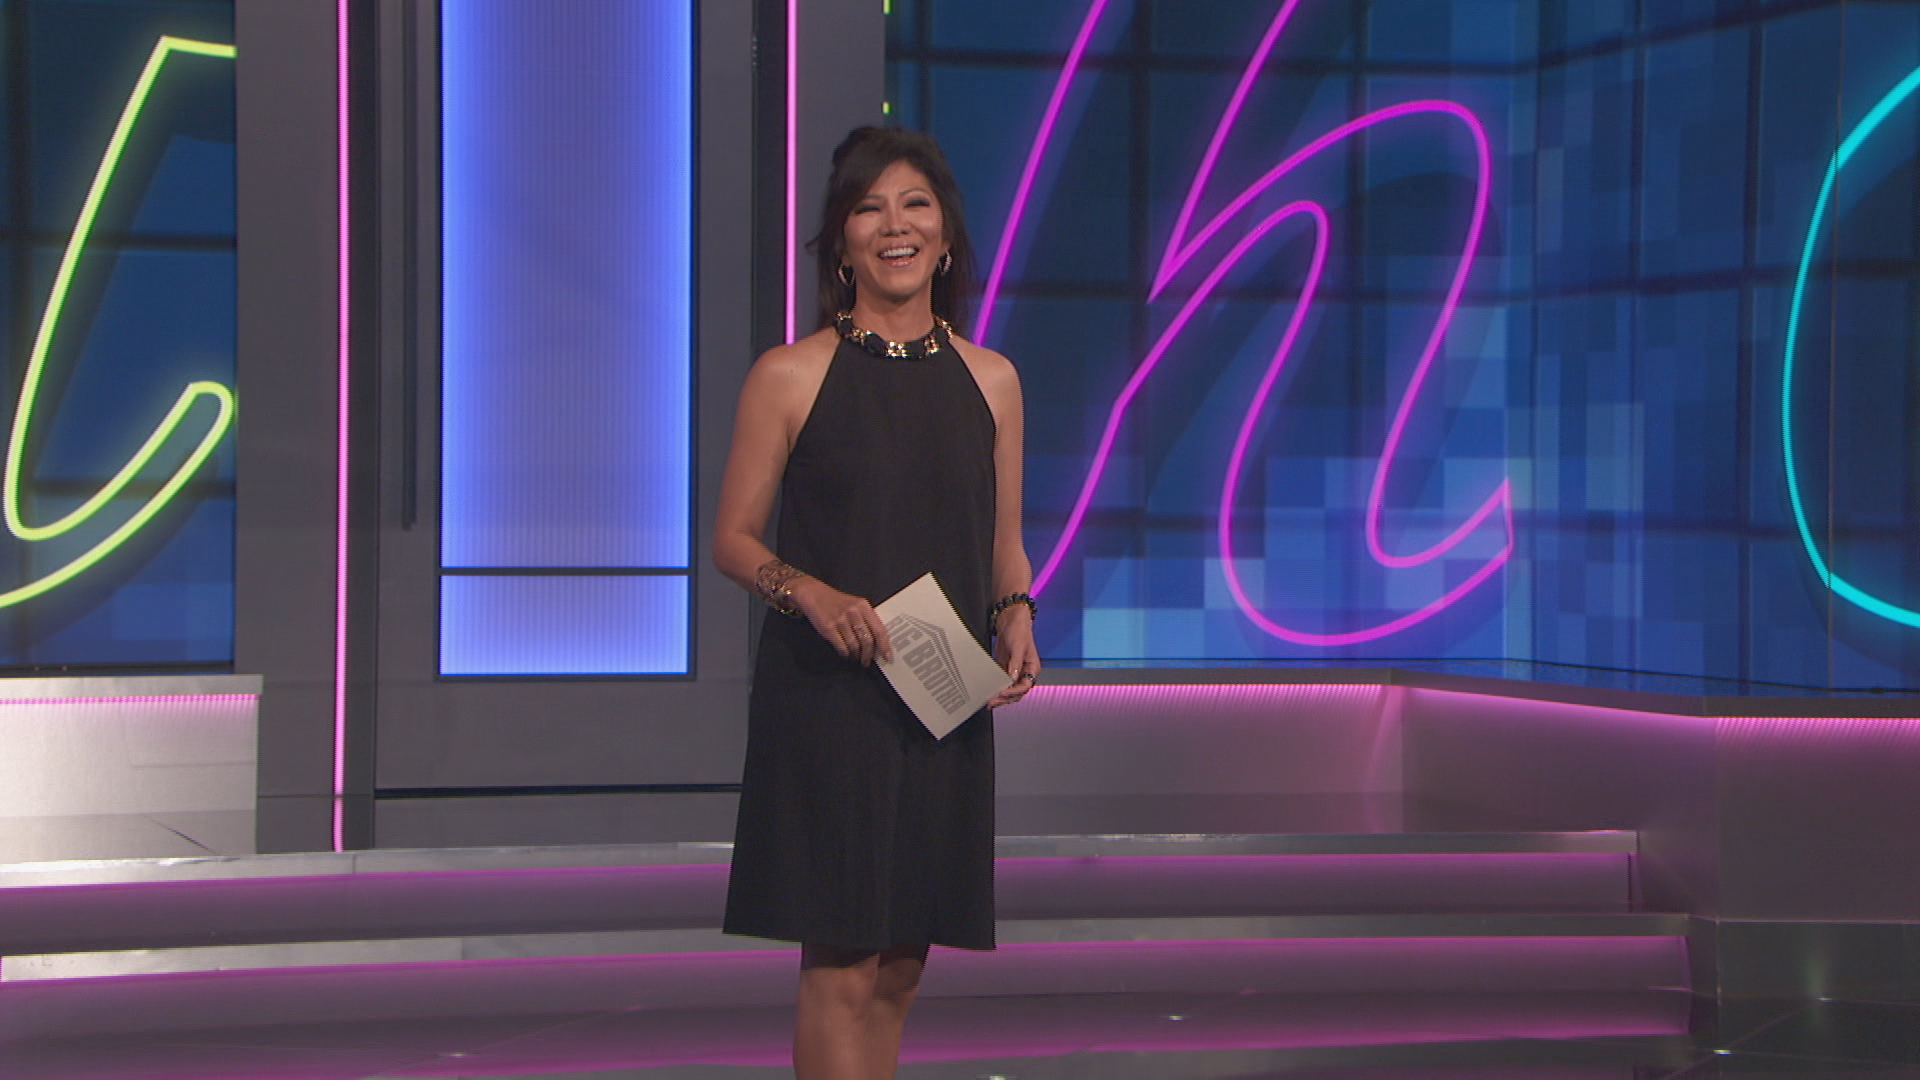 Julie Chen Moonves smiling on the set of 'Big Brother 23'